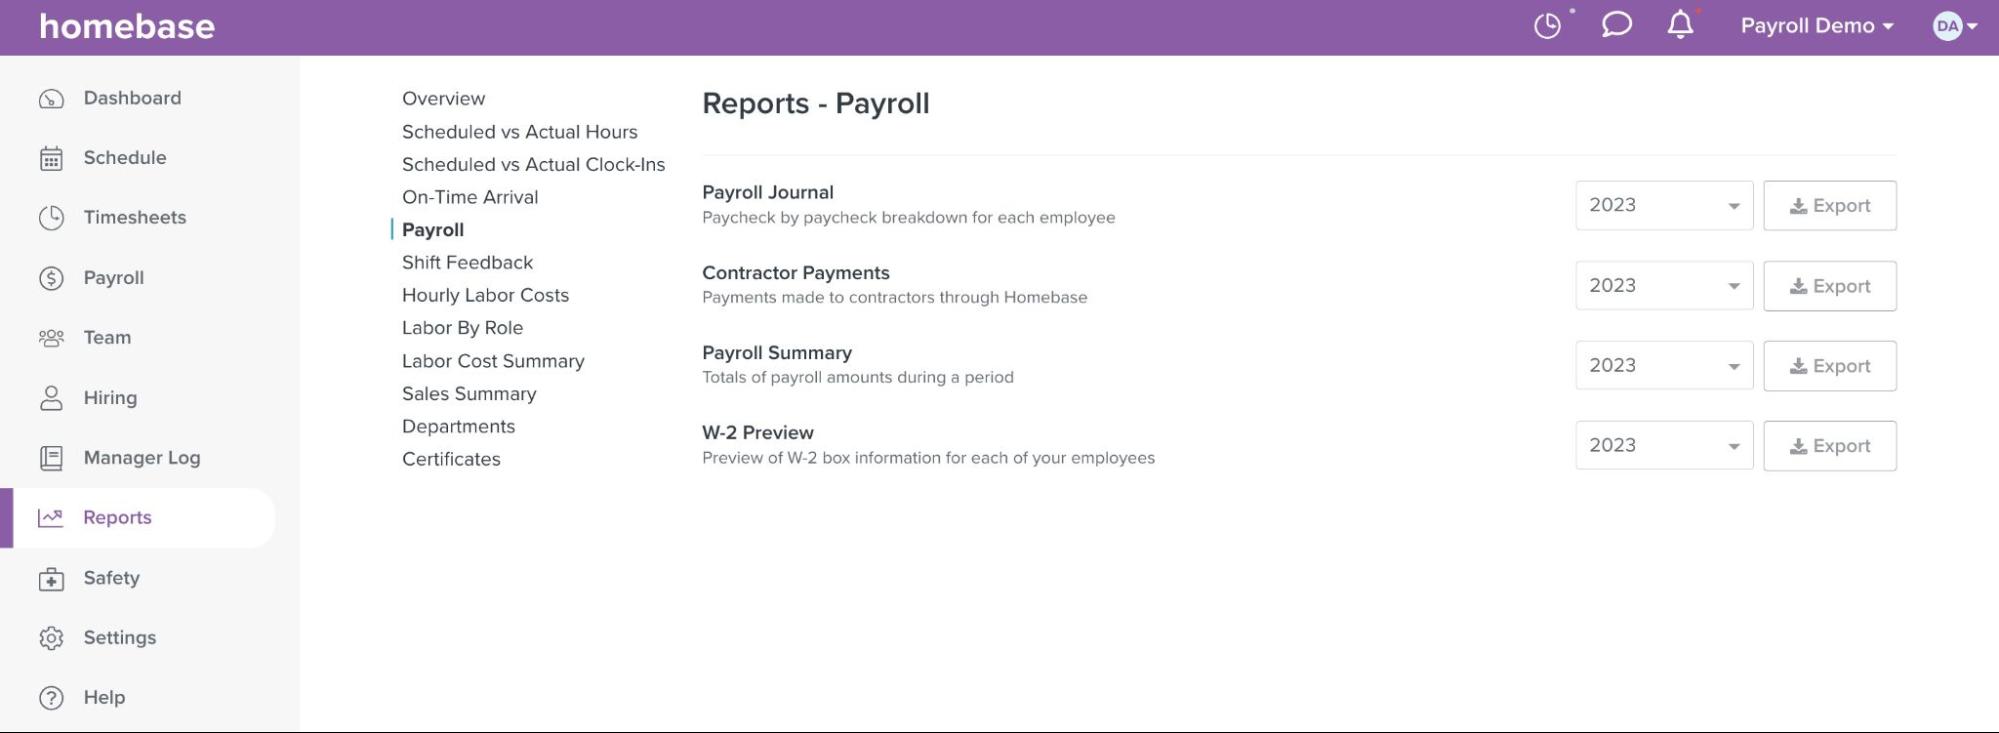 A screenshot of the payroll feature on Homebase.